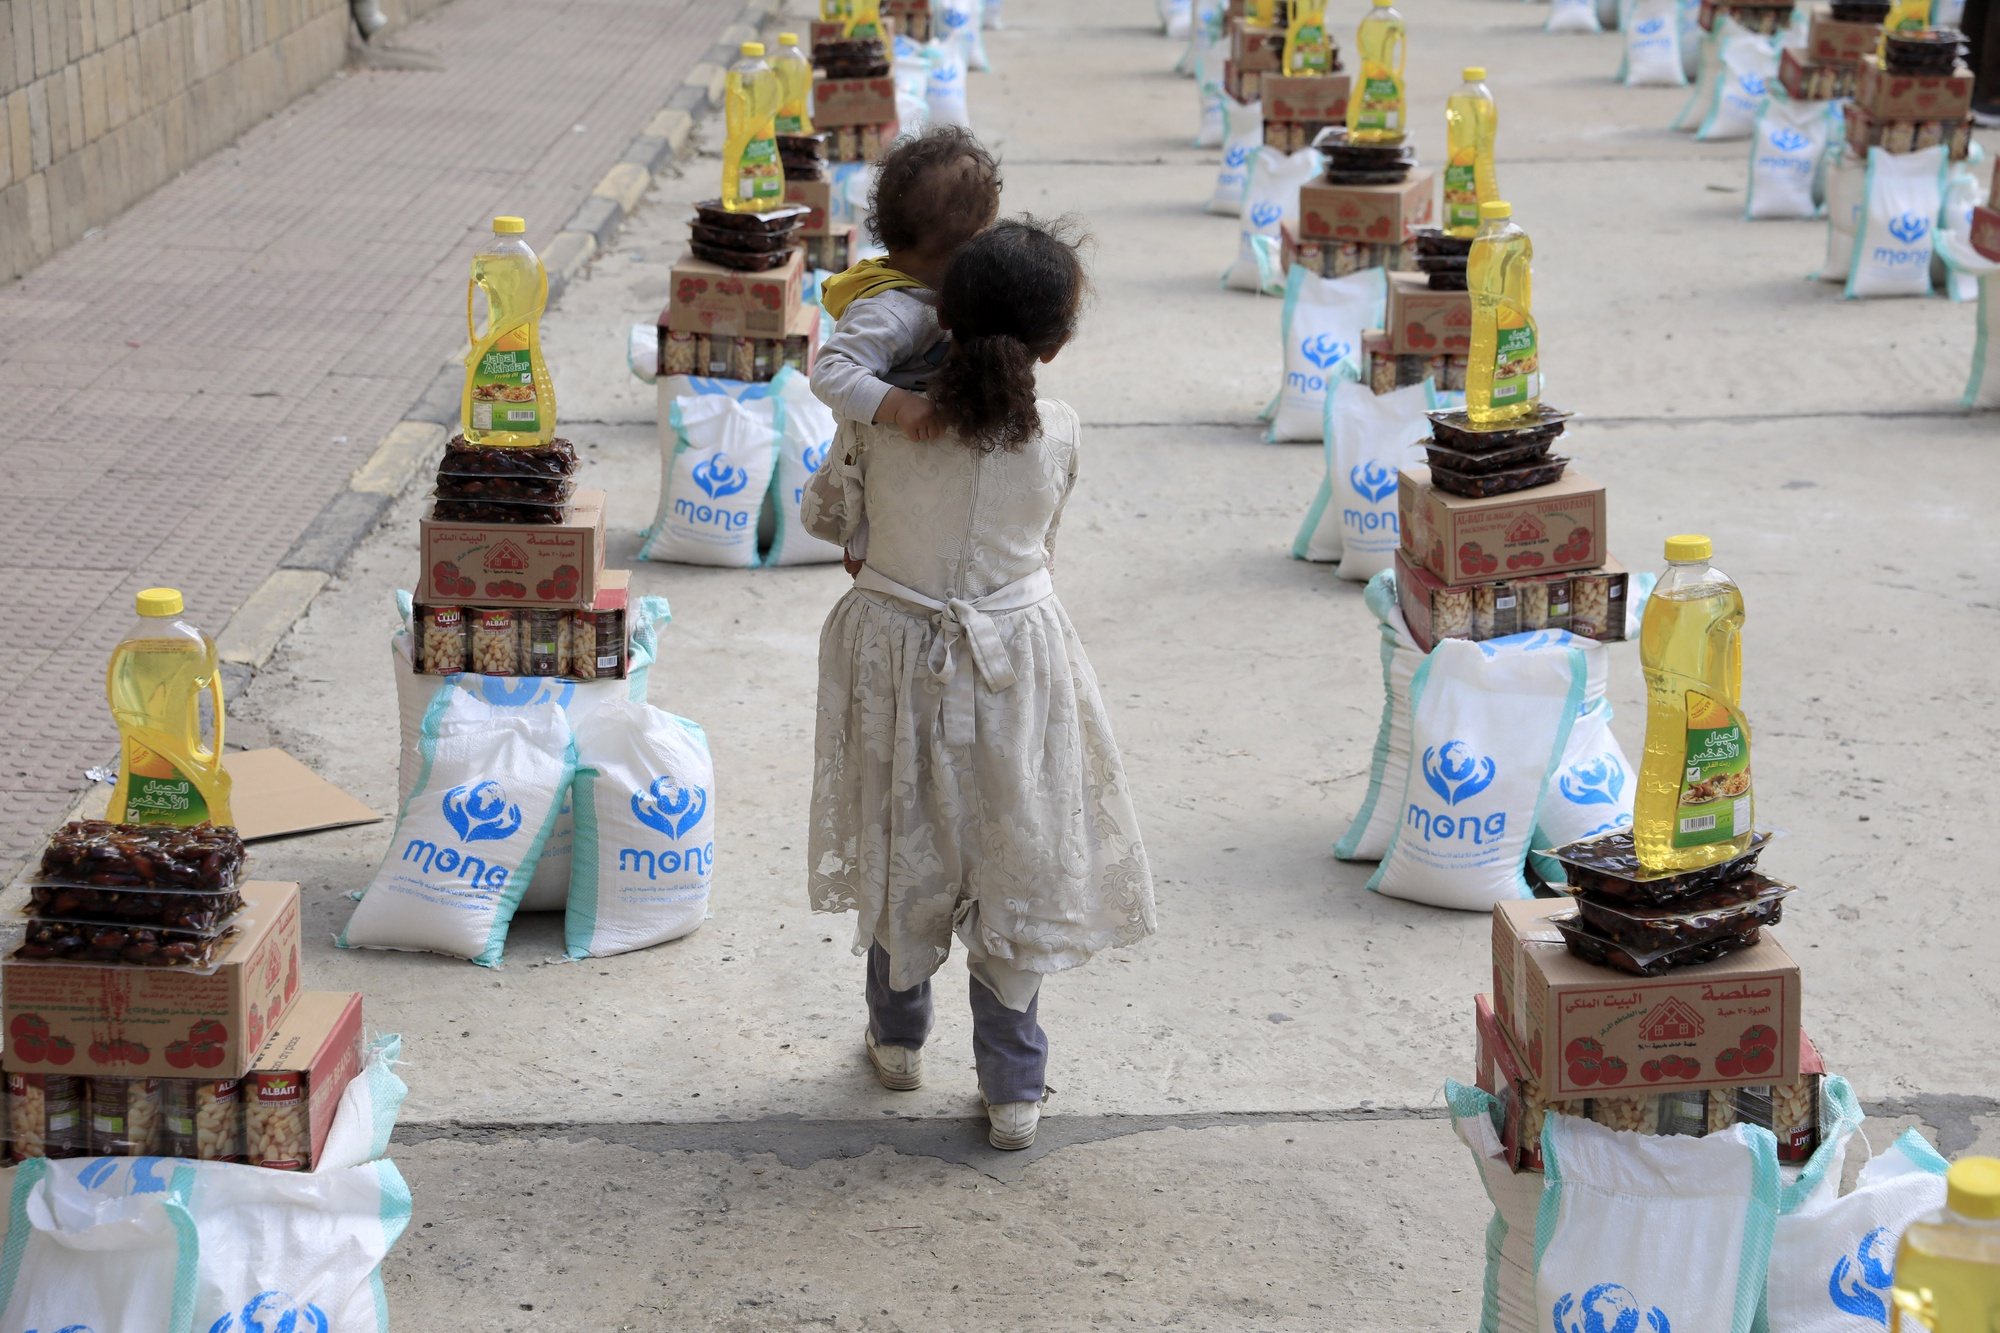 epa11220967 A girl carrying her brother walks amongst food aid provided by Mona relief agency amid acute food insecurity, during the fasting month of Ramadan, in Sana&#039;a, Yemen, 14 March 2024. The Mona relief agency has distributed over 120 food aid baskets to vulnerable families in Sana&#039;a amid acute food insecurity in the war-ravaged country. More than 18 million people in Yemen, over half the population, will need humanitarian assistance and protection services in 2024, according to estimates by the United Nations. The Muslims&#039; holy month of Ramadan is the ninth month in the Islamic calendar, and it is believed that the revelation of the first verse in the Koran was during its last 10 nights. It is celebrated yearly by praying during the night and abstaining from eating, drinking, and sexual acts during the period between sunrise and sunset. It is also a time for socializing, mainly in the evening after breaking the fast, and a shift of all activities to late in the day in most countries.  EPA/YAHYA ARHAB